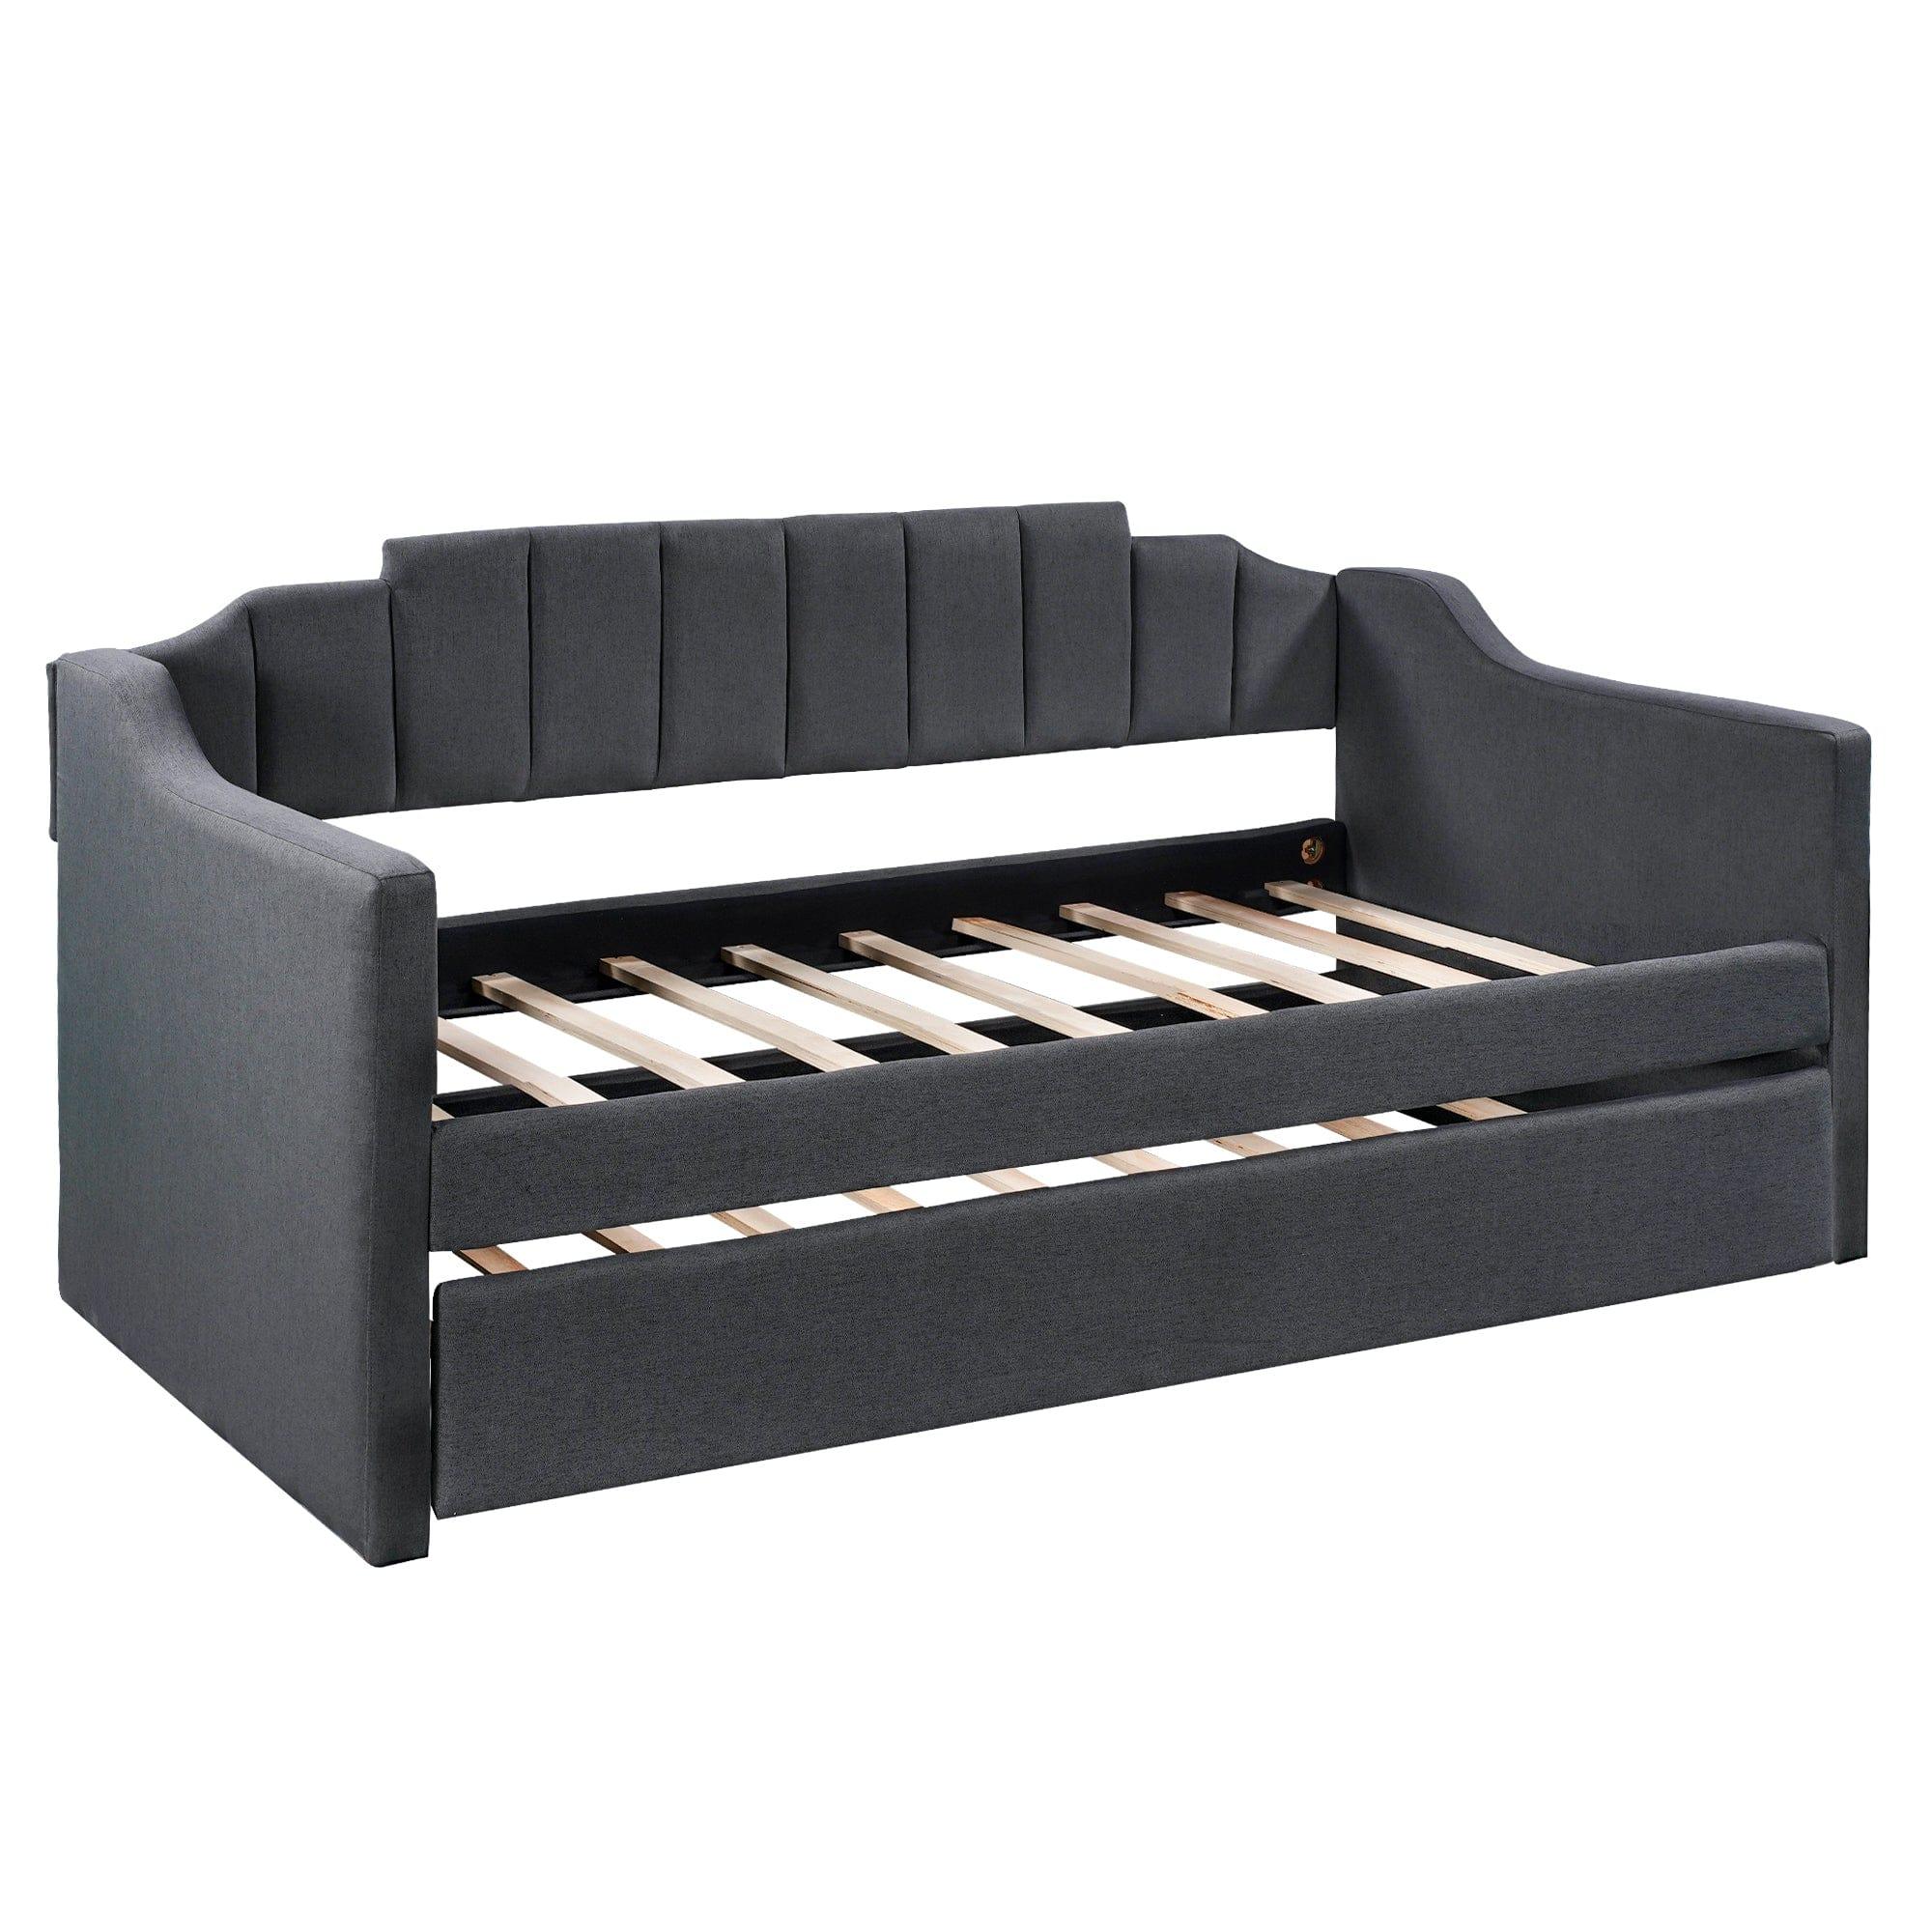 Shop Upholstered Twin Daybed with Trundle,Black Mademoiselle Home Decor